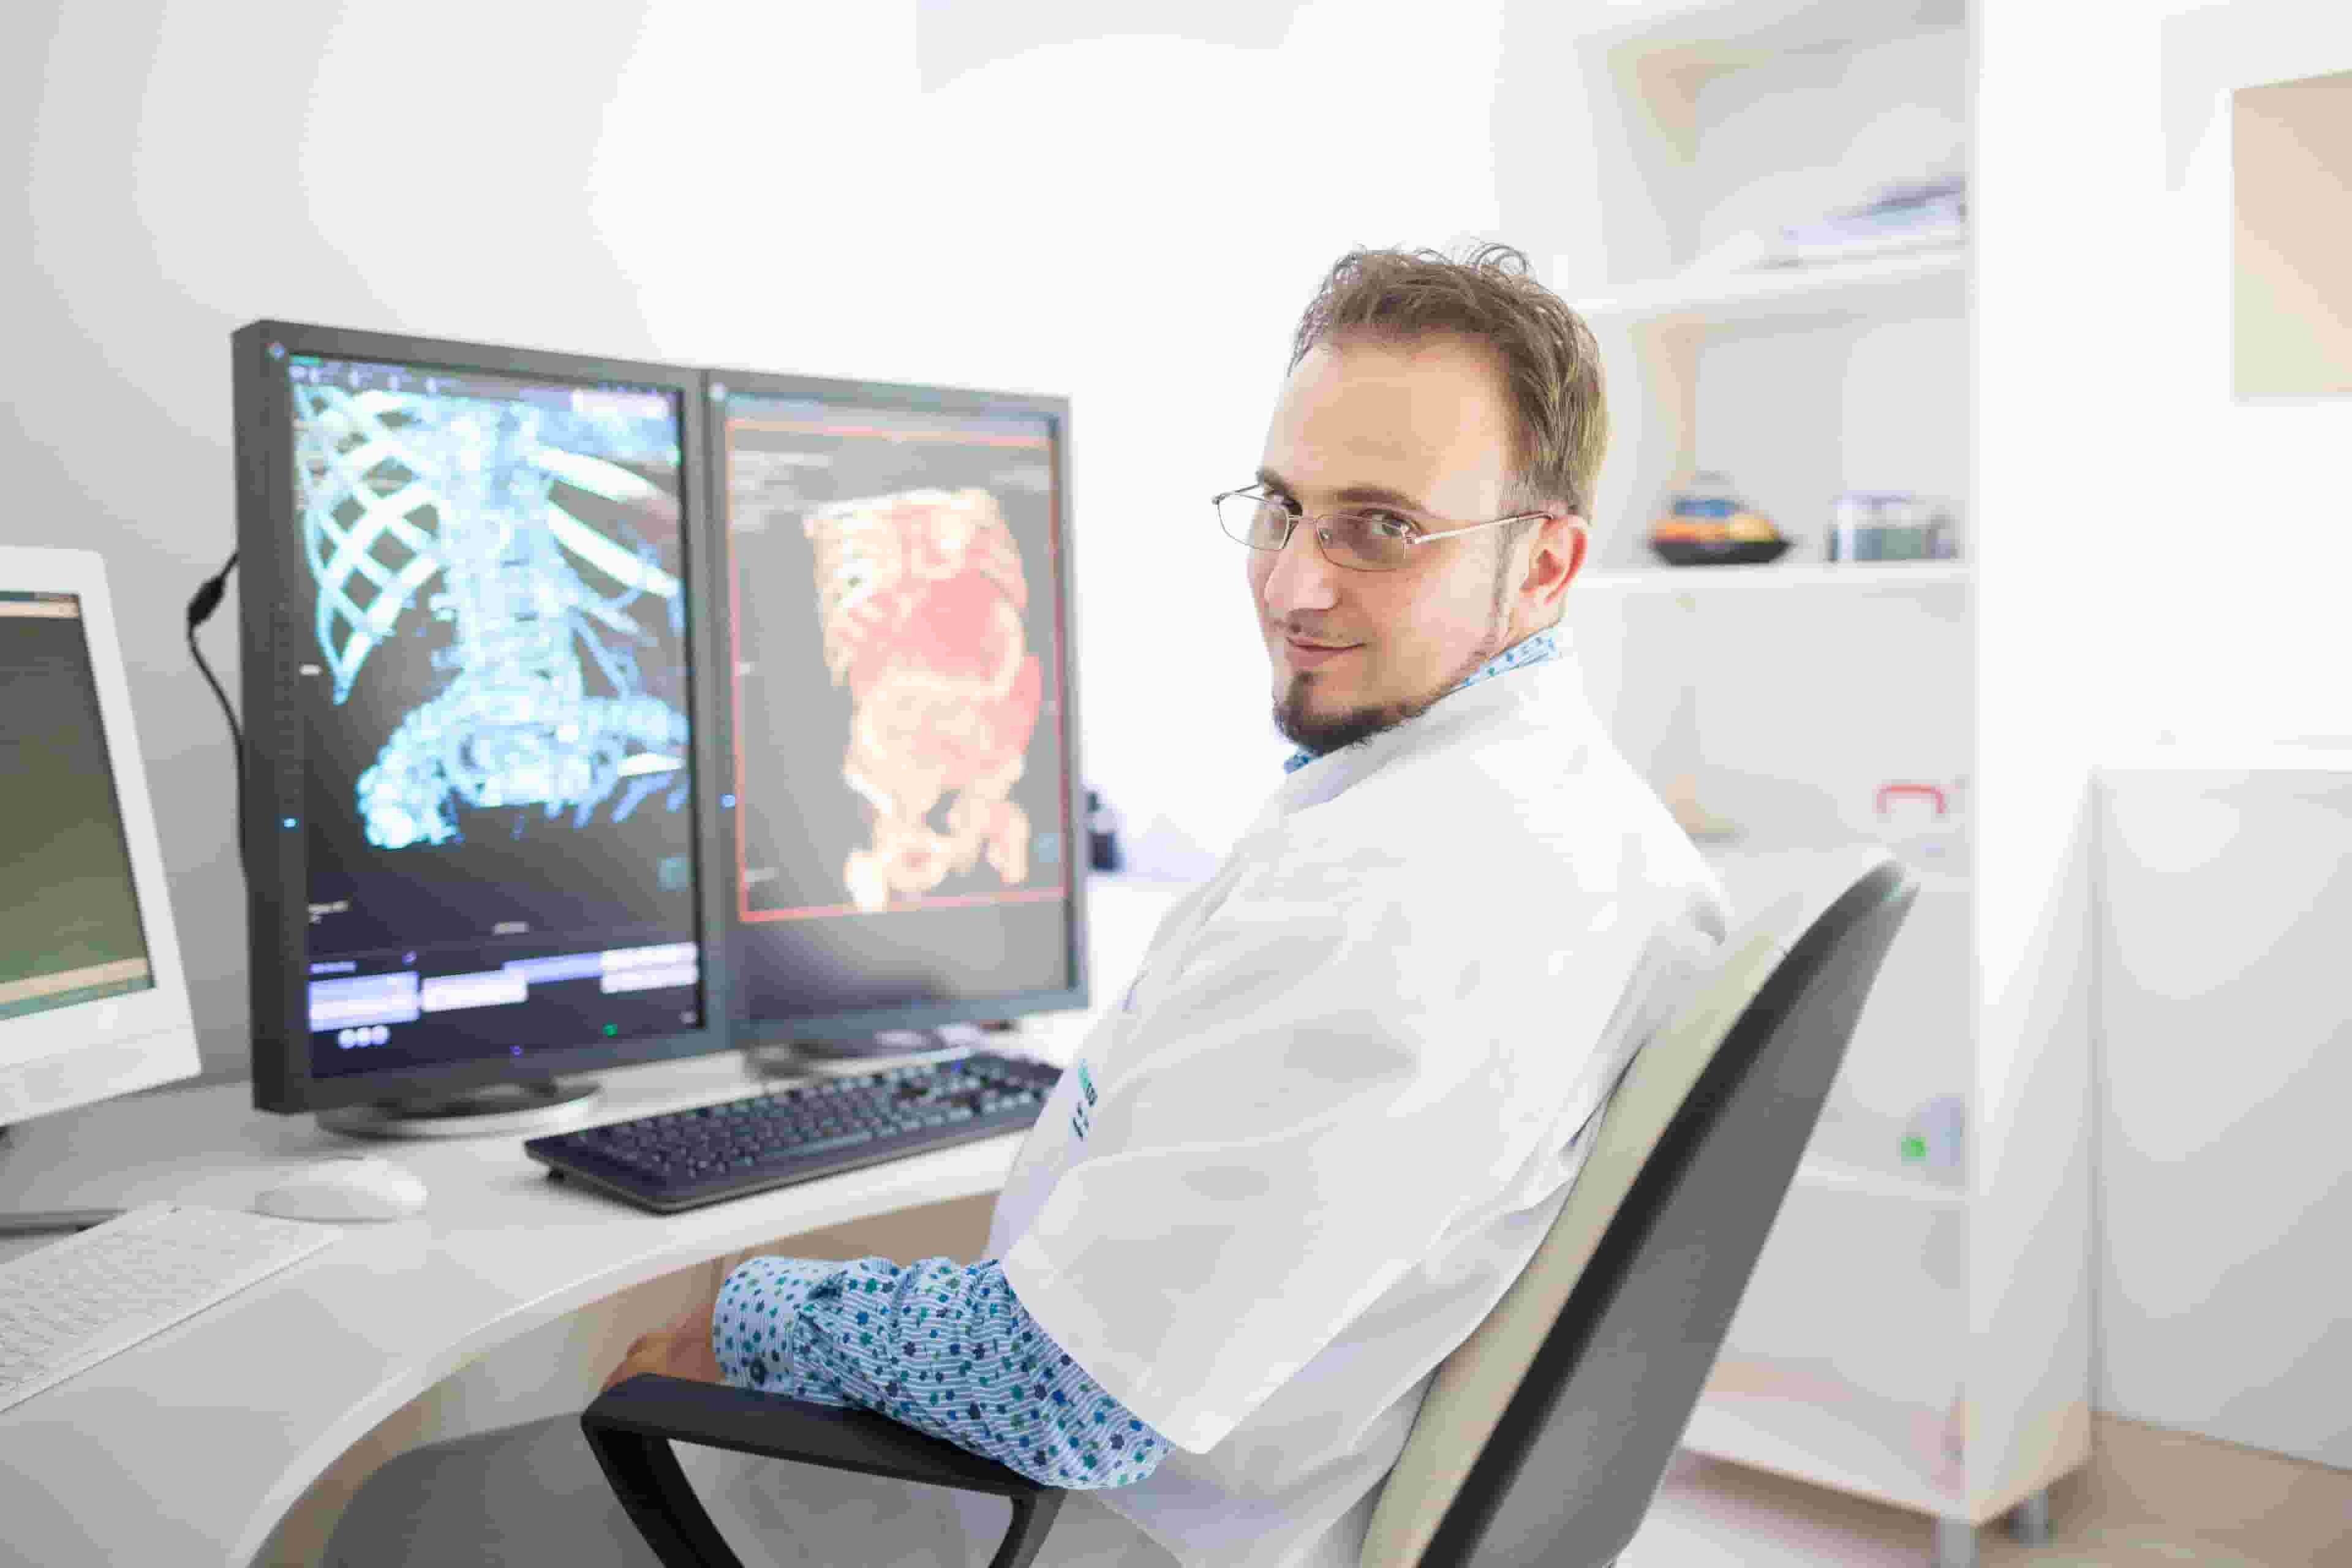 Dr. Sorin Ghiea sitting at the desk with two monitors showing medical images